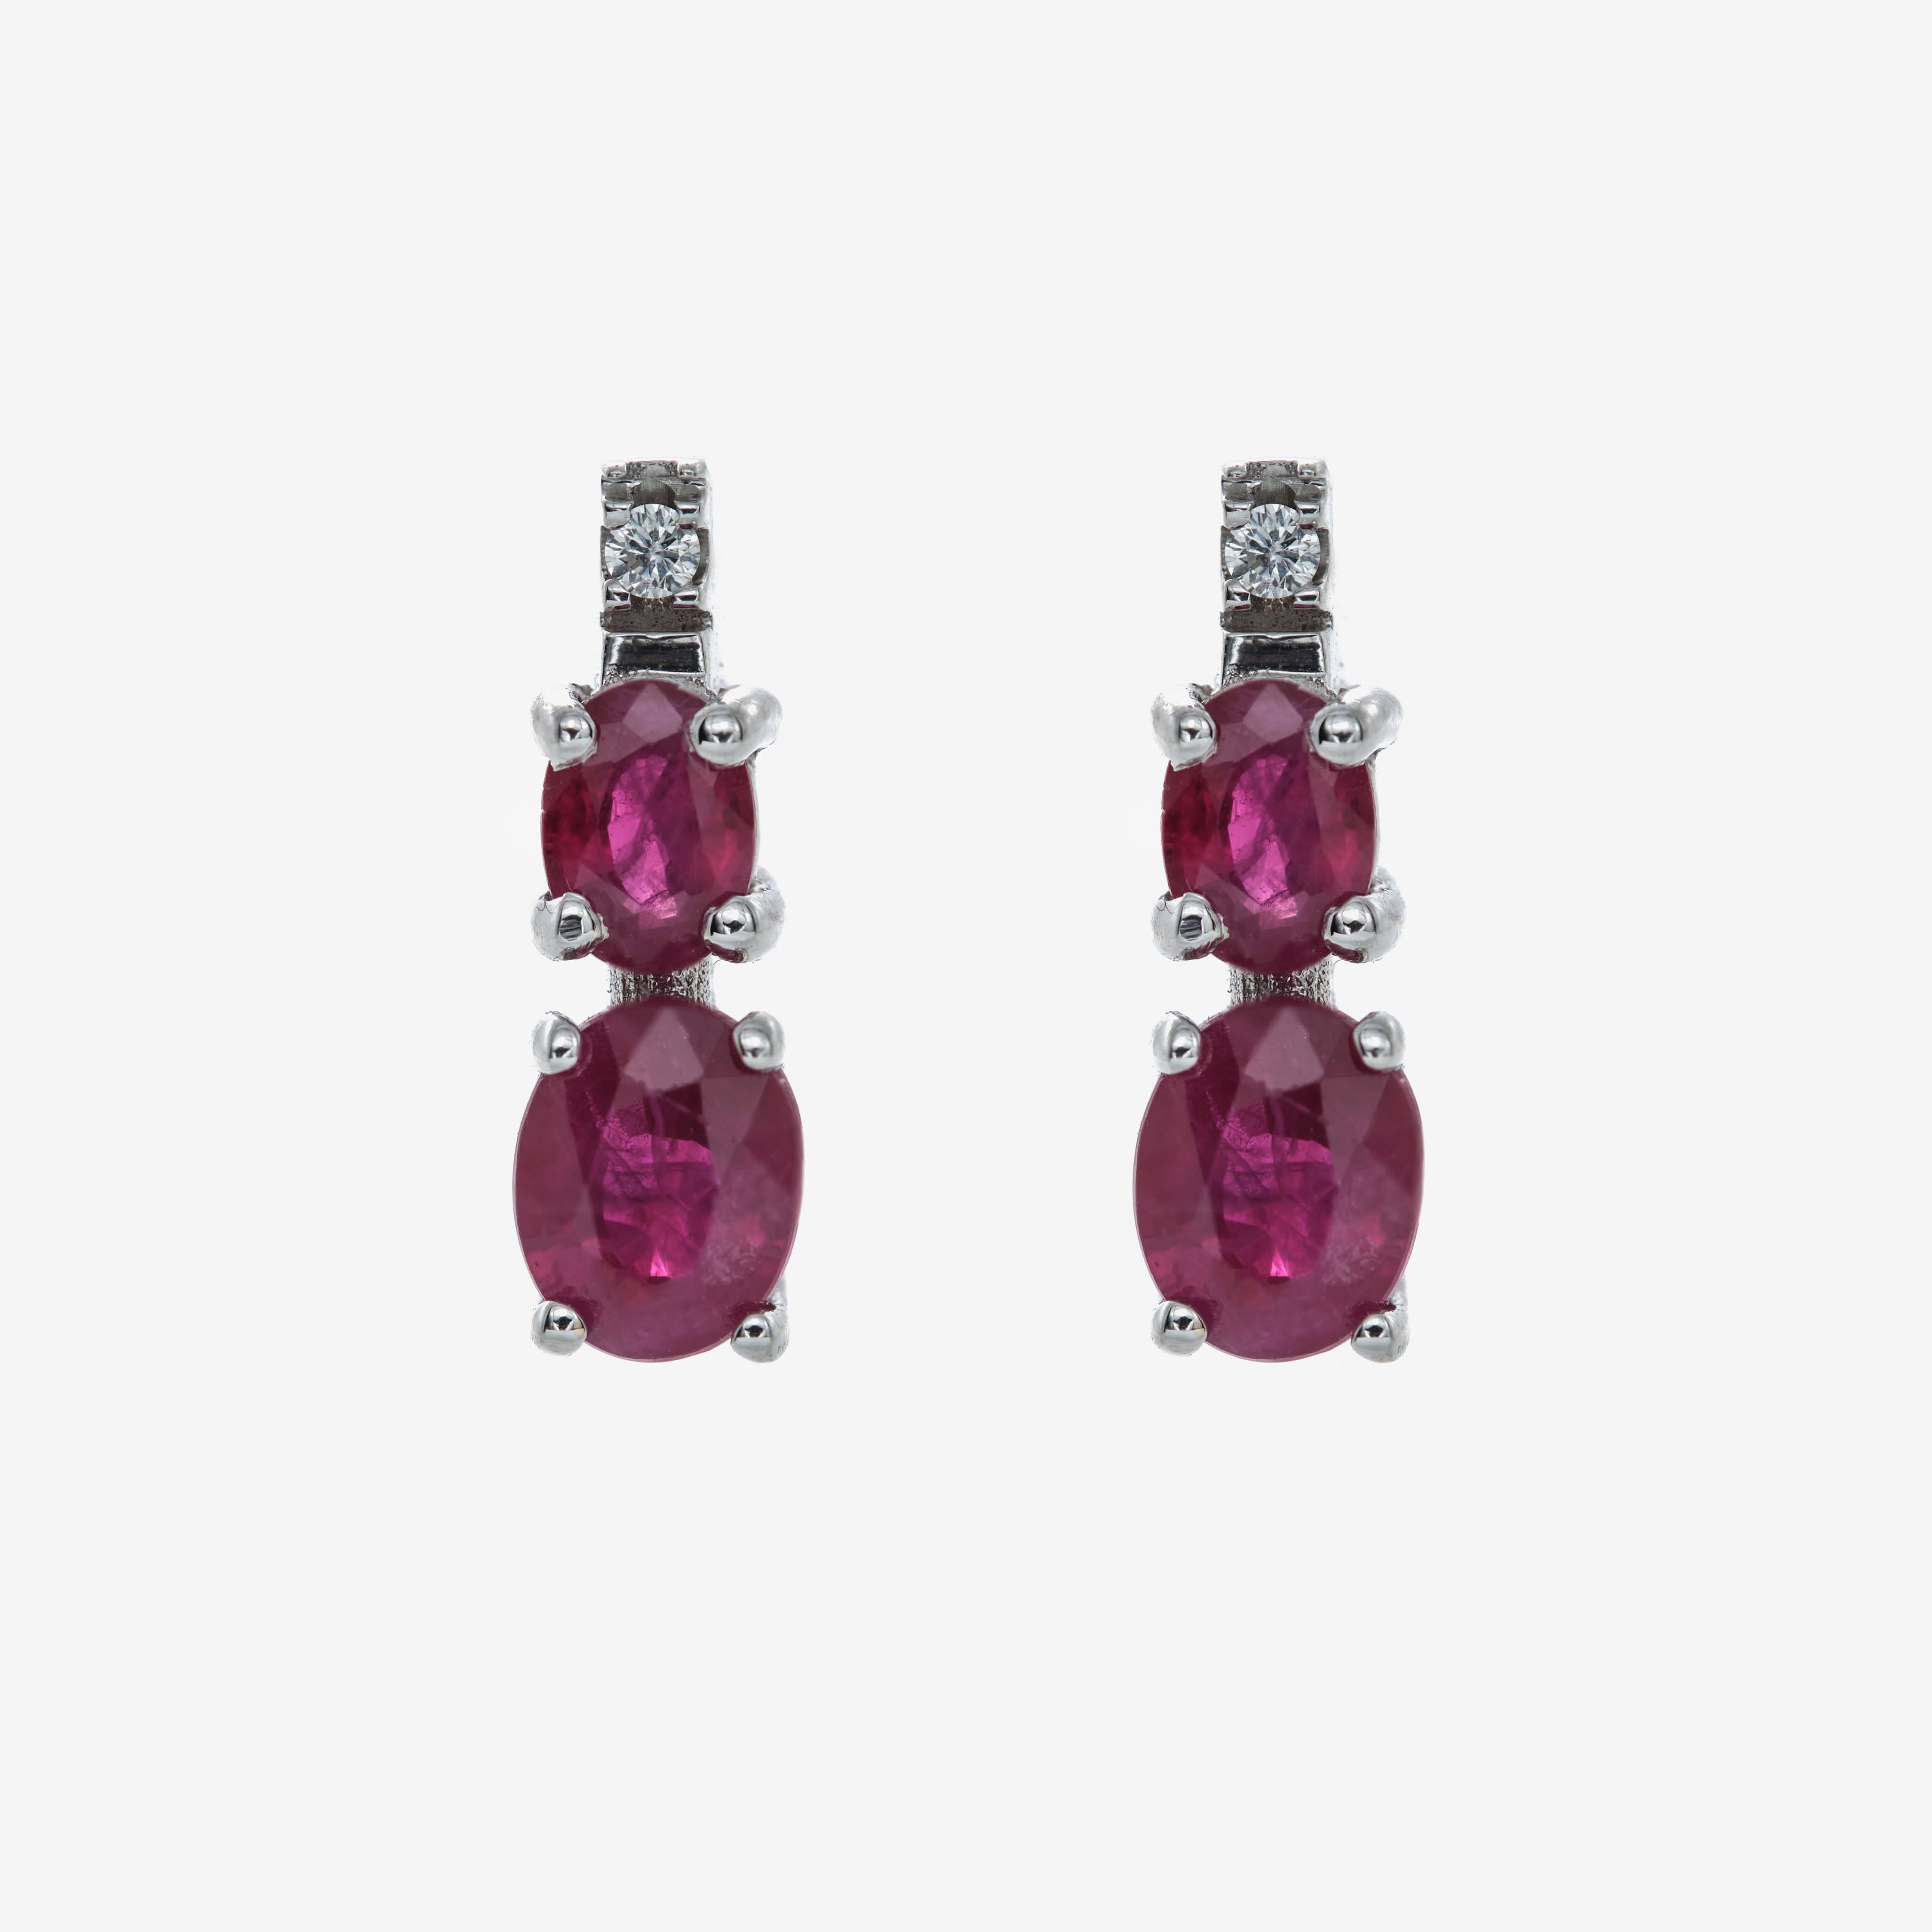 Smooth earrings with rubies and diamonds